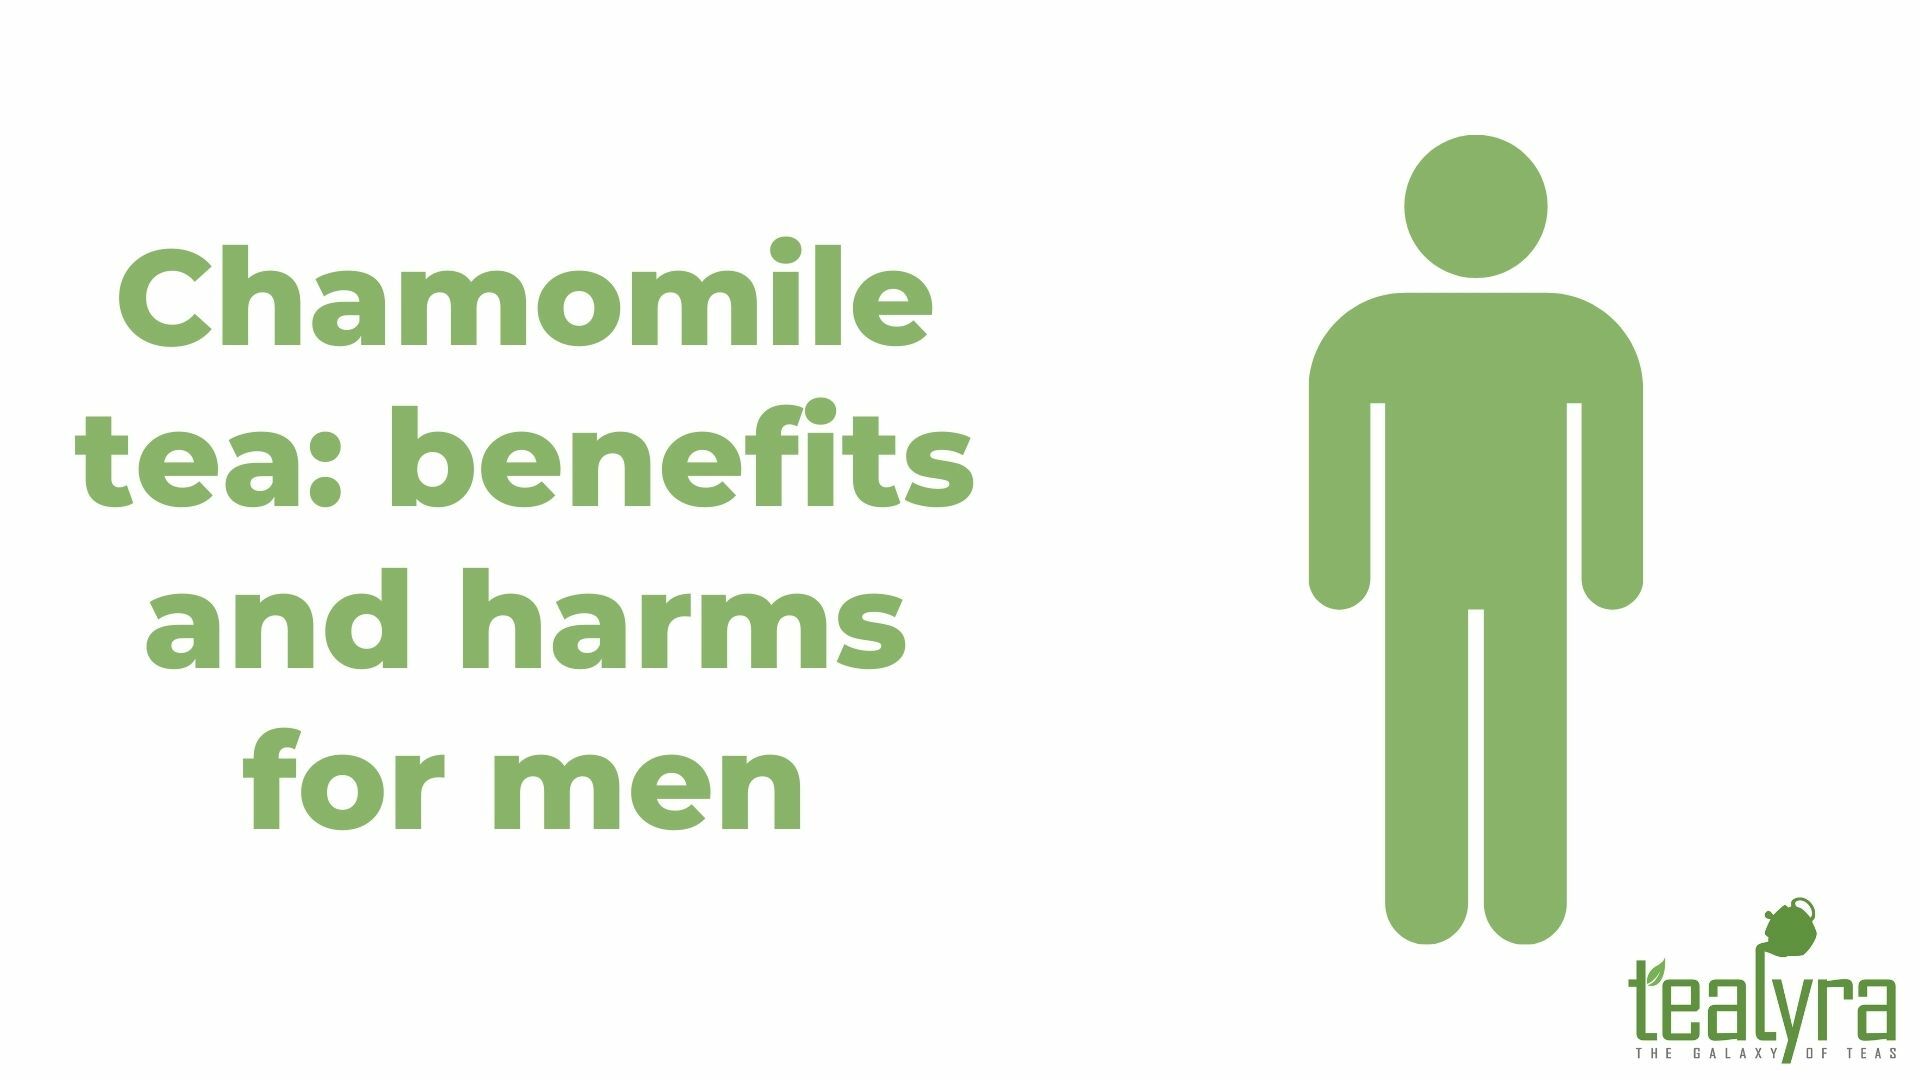 Image-chamomile-tea-benefits-and-harms-for-men